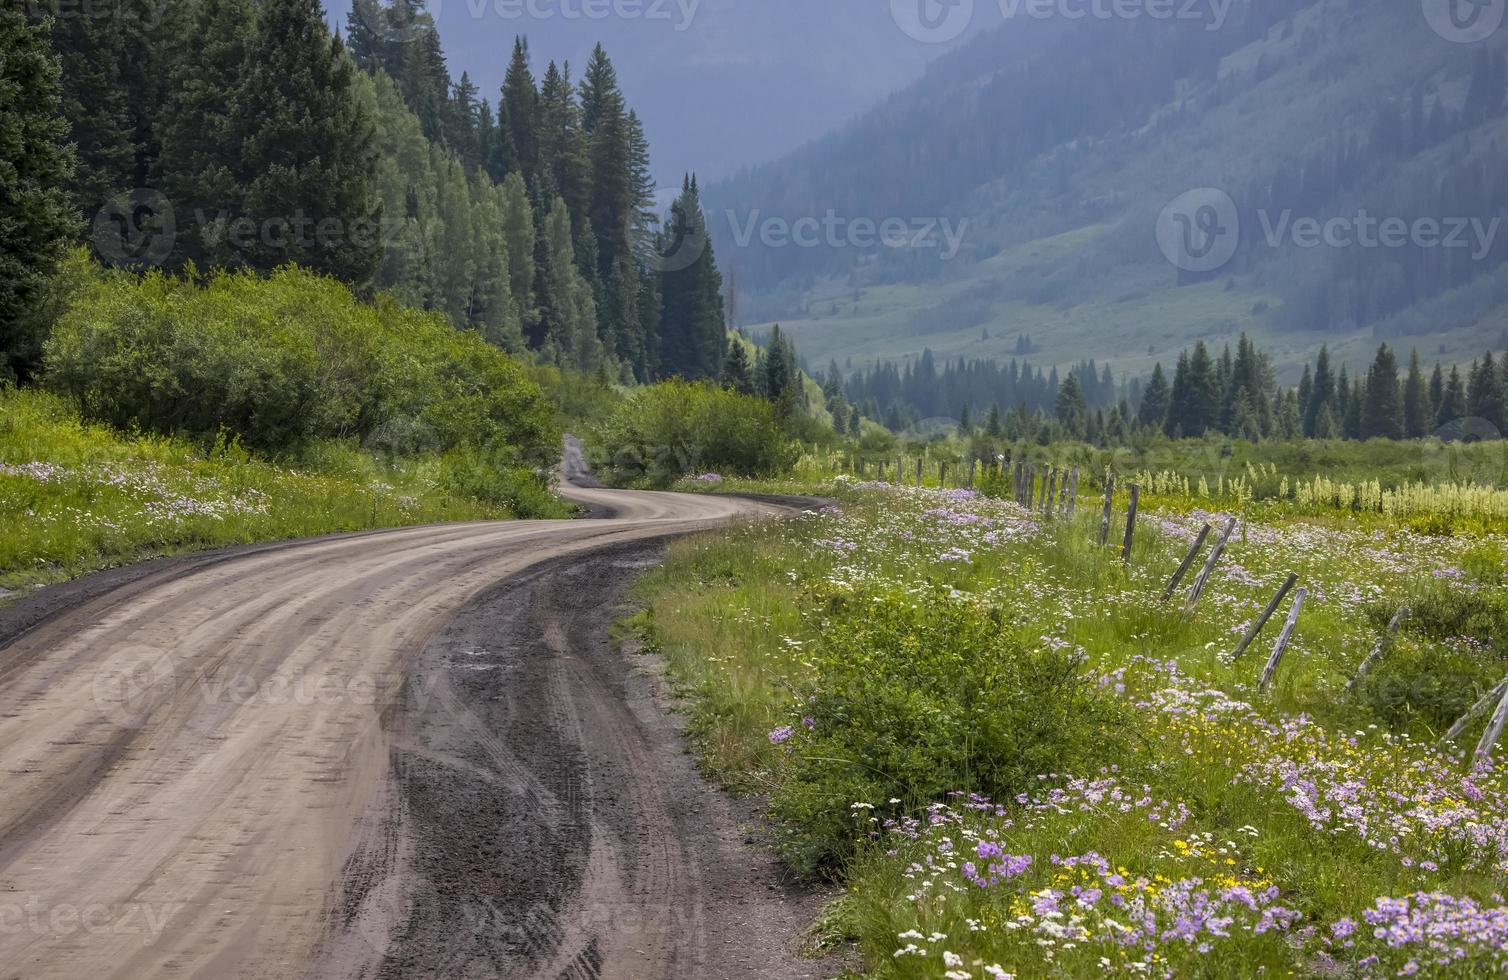 Scenic back road 734 through wildflower meadows in Colorado Rocky mountains near Crested Butte photo